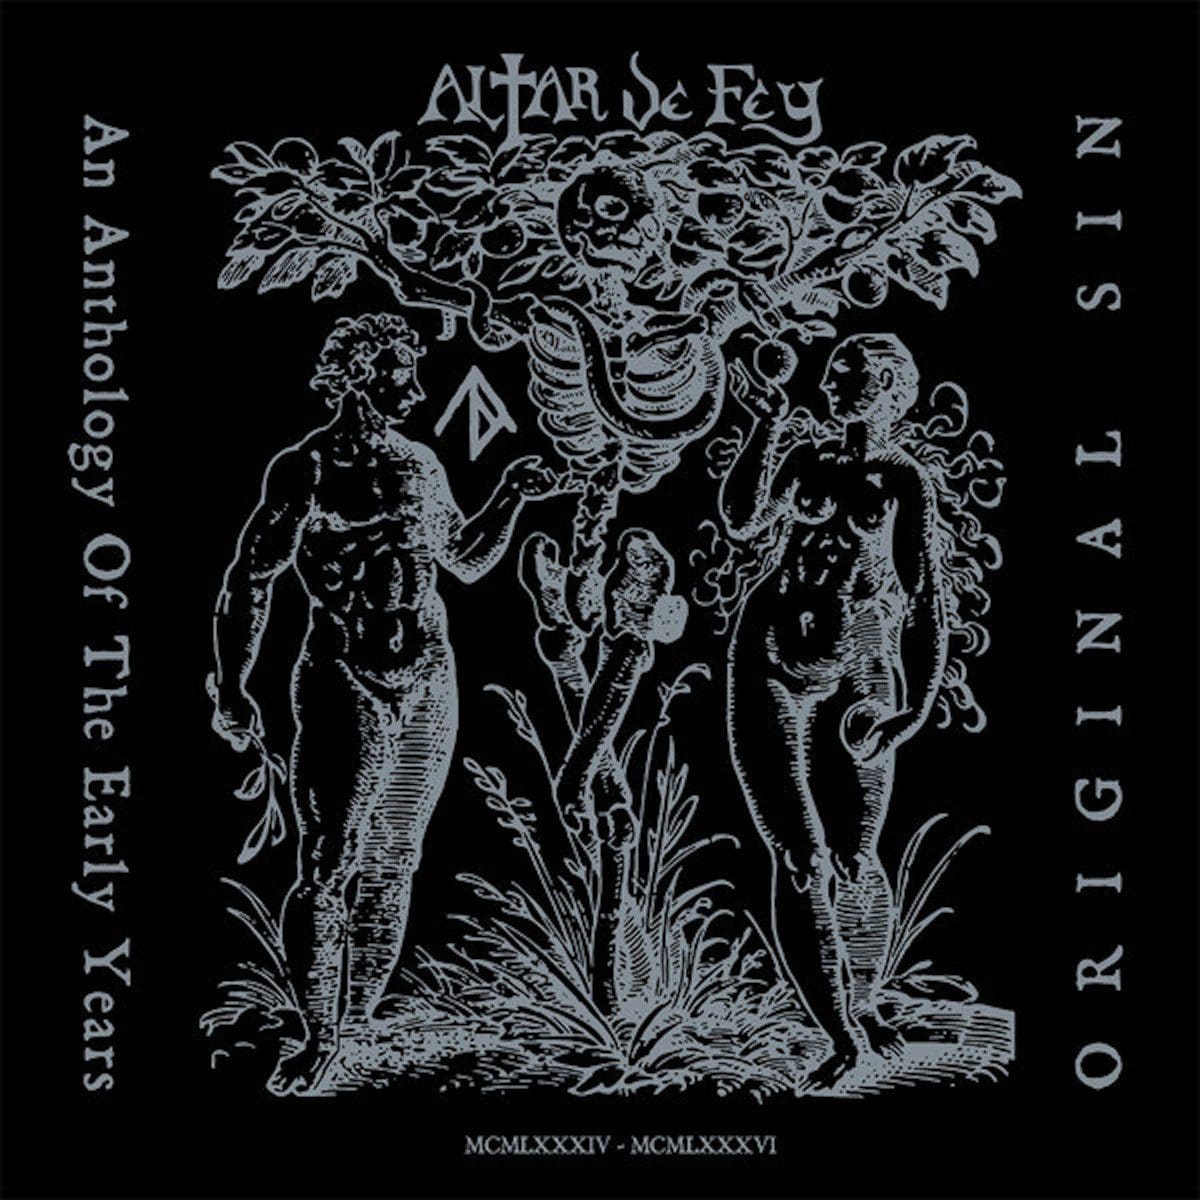 Vinyl release for anthology recordings by the deathrock act Altar De Fey